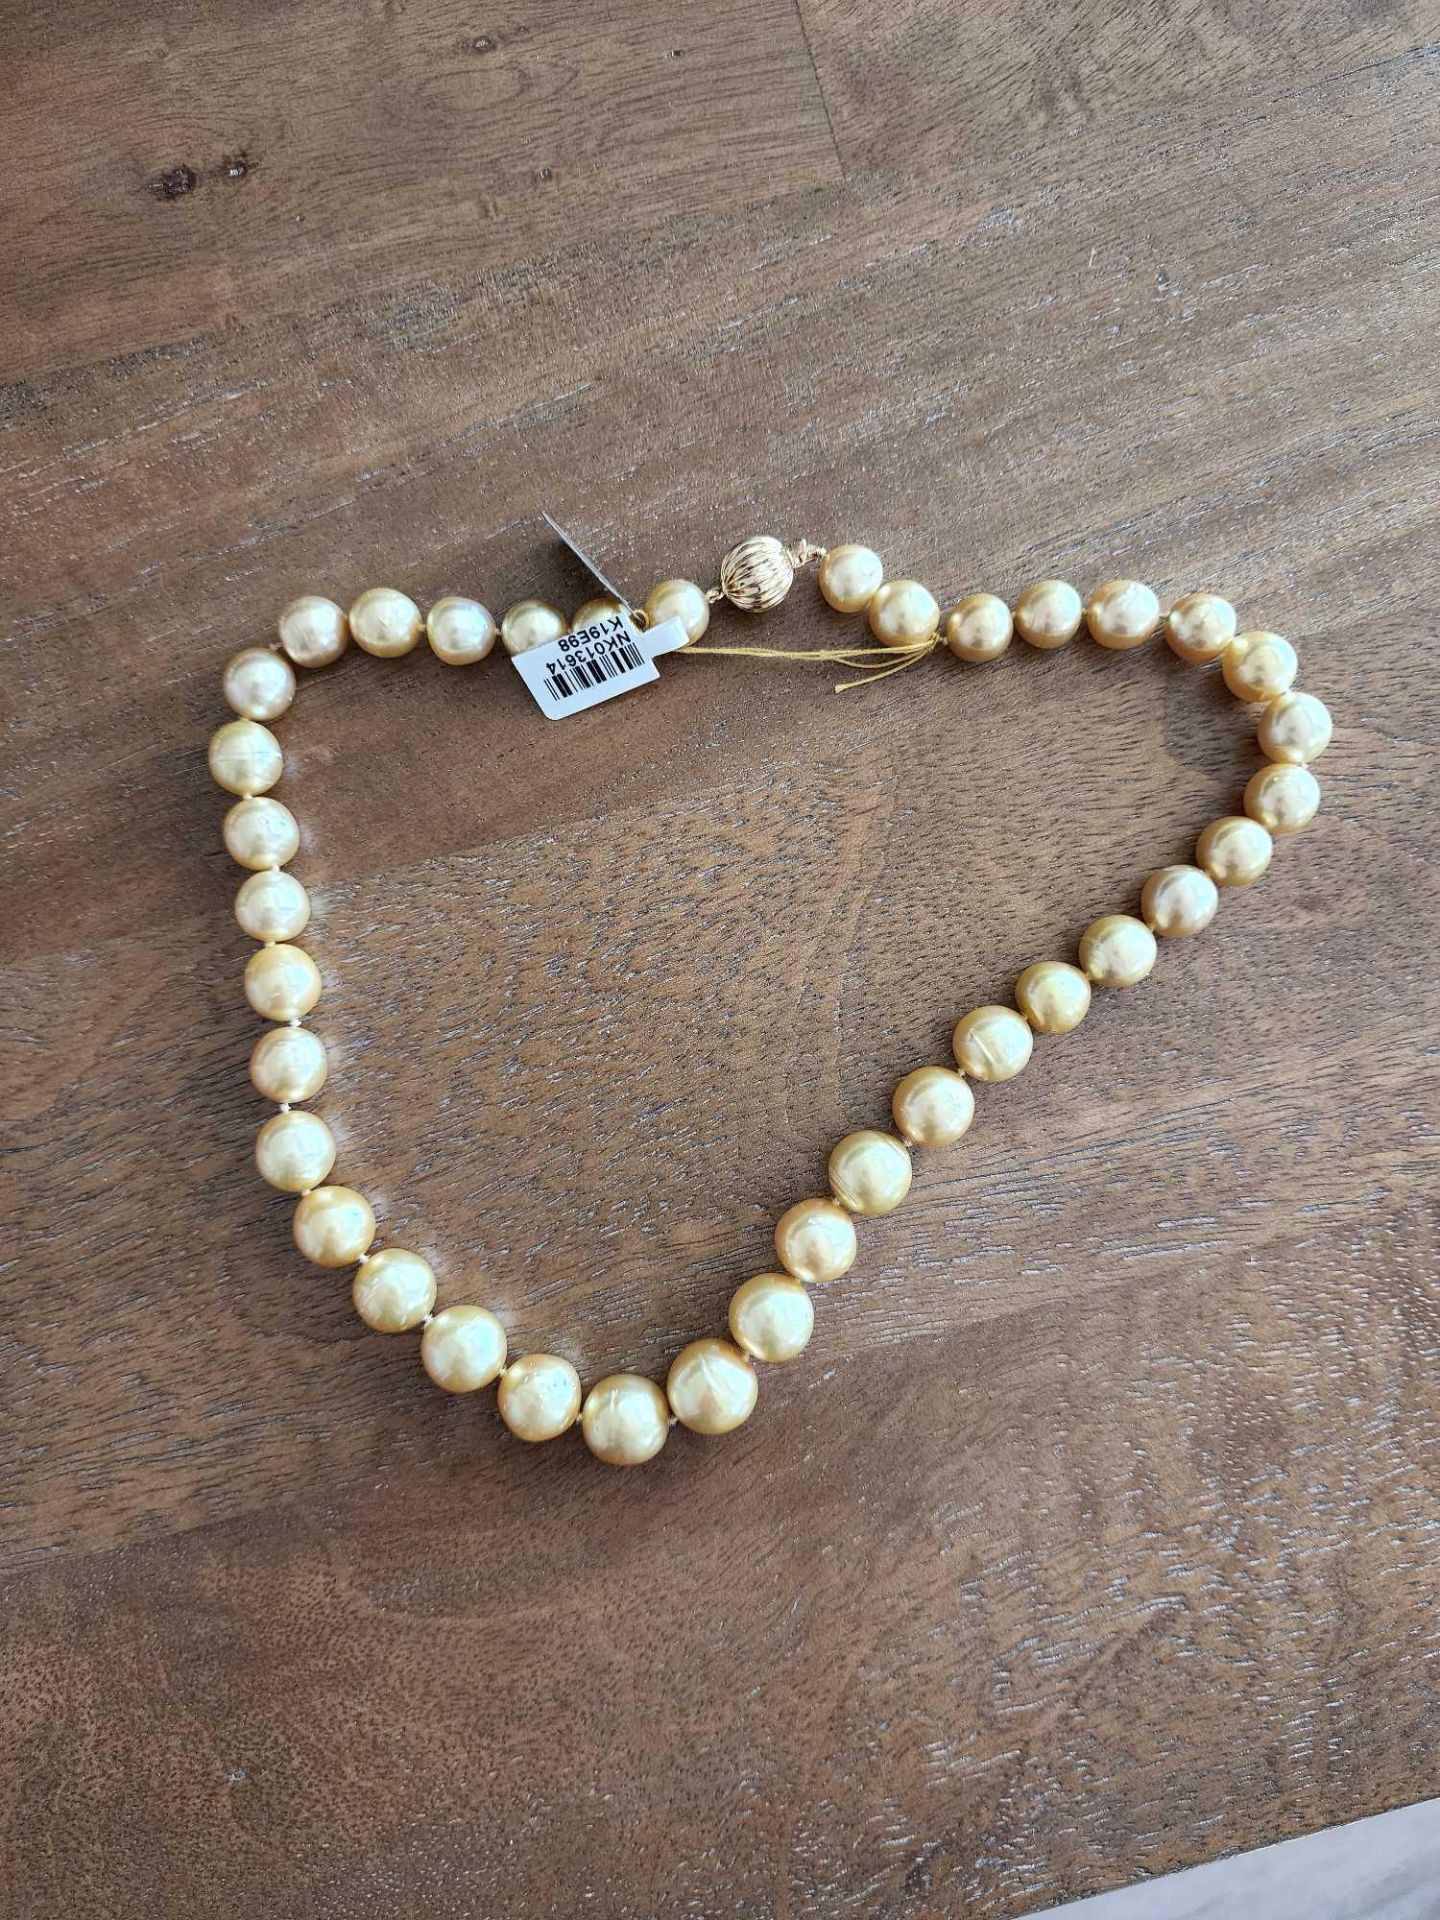 Golden South Sea Pearl Necklace - Image 8 of 8